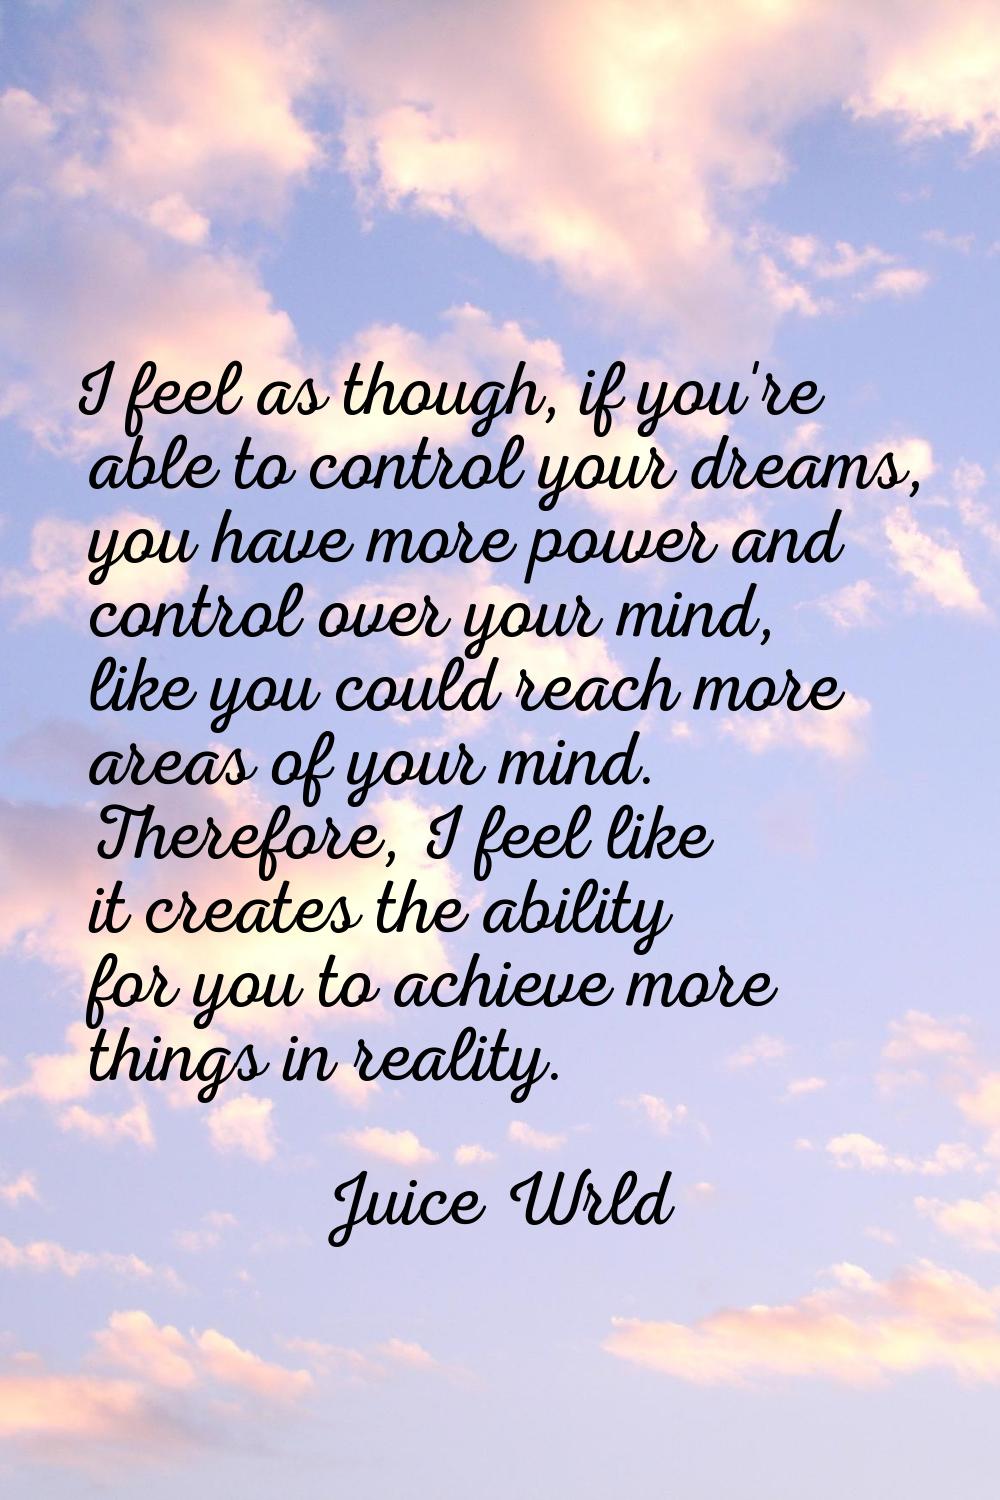 I feel as though, if you're able to control your dreams, you have more power and control over your 